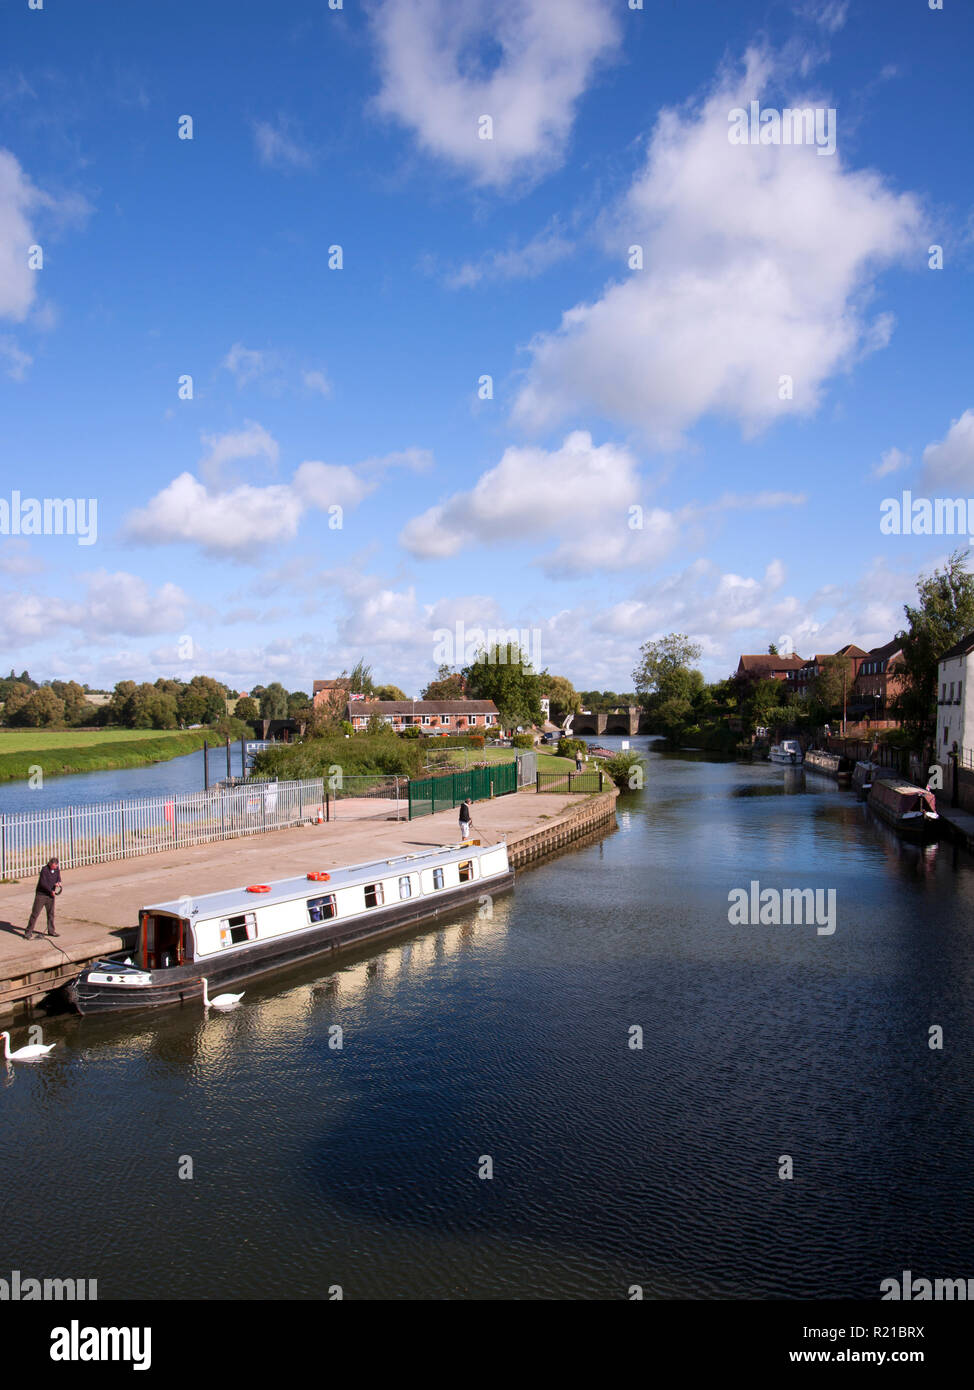 Tewkesbury, Gloucestershire, UK - 18th September 2012: A hired canal boat prepares to leave moorings along the Avon Navigation near the centre of Tewkesbury, Gloucestershire, UK Stock Photo